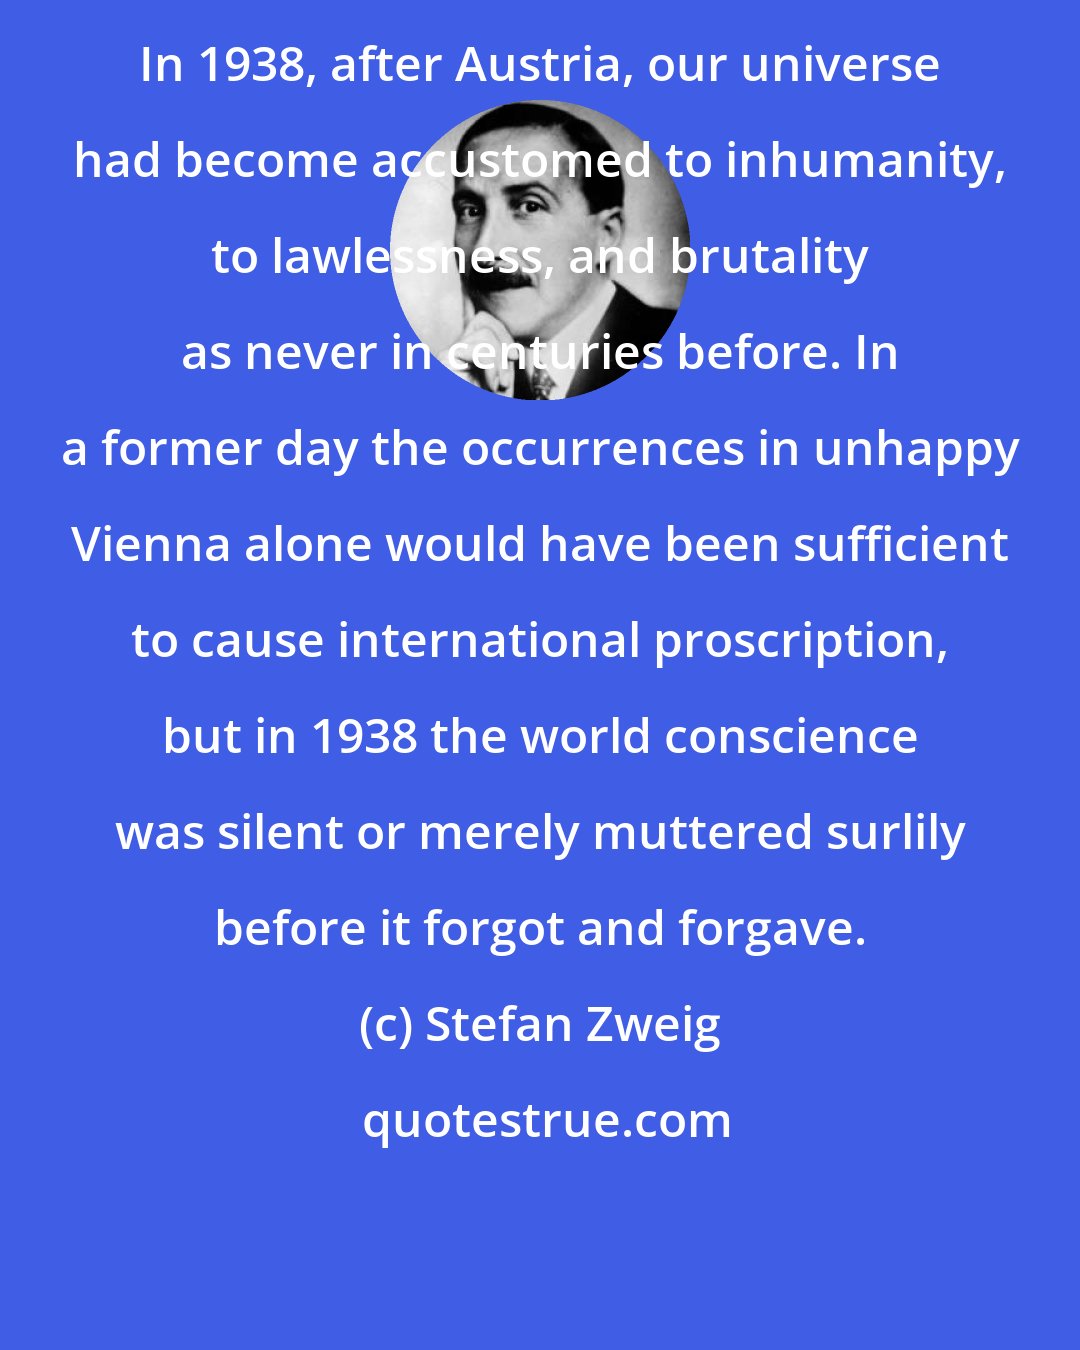 Stefan Zweig: In 1938, after Austria, our universe had become accustomed to inhumanity, to lawlessness, and brutality as never in centuries before. In a former day the occurrences in unhappy Vienna alone would have been sufficient to cause international proscription, but in 1938 the world conscience was silent or merely muttered surlily before it forgot and forgave.